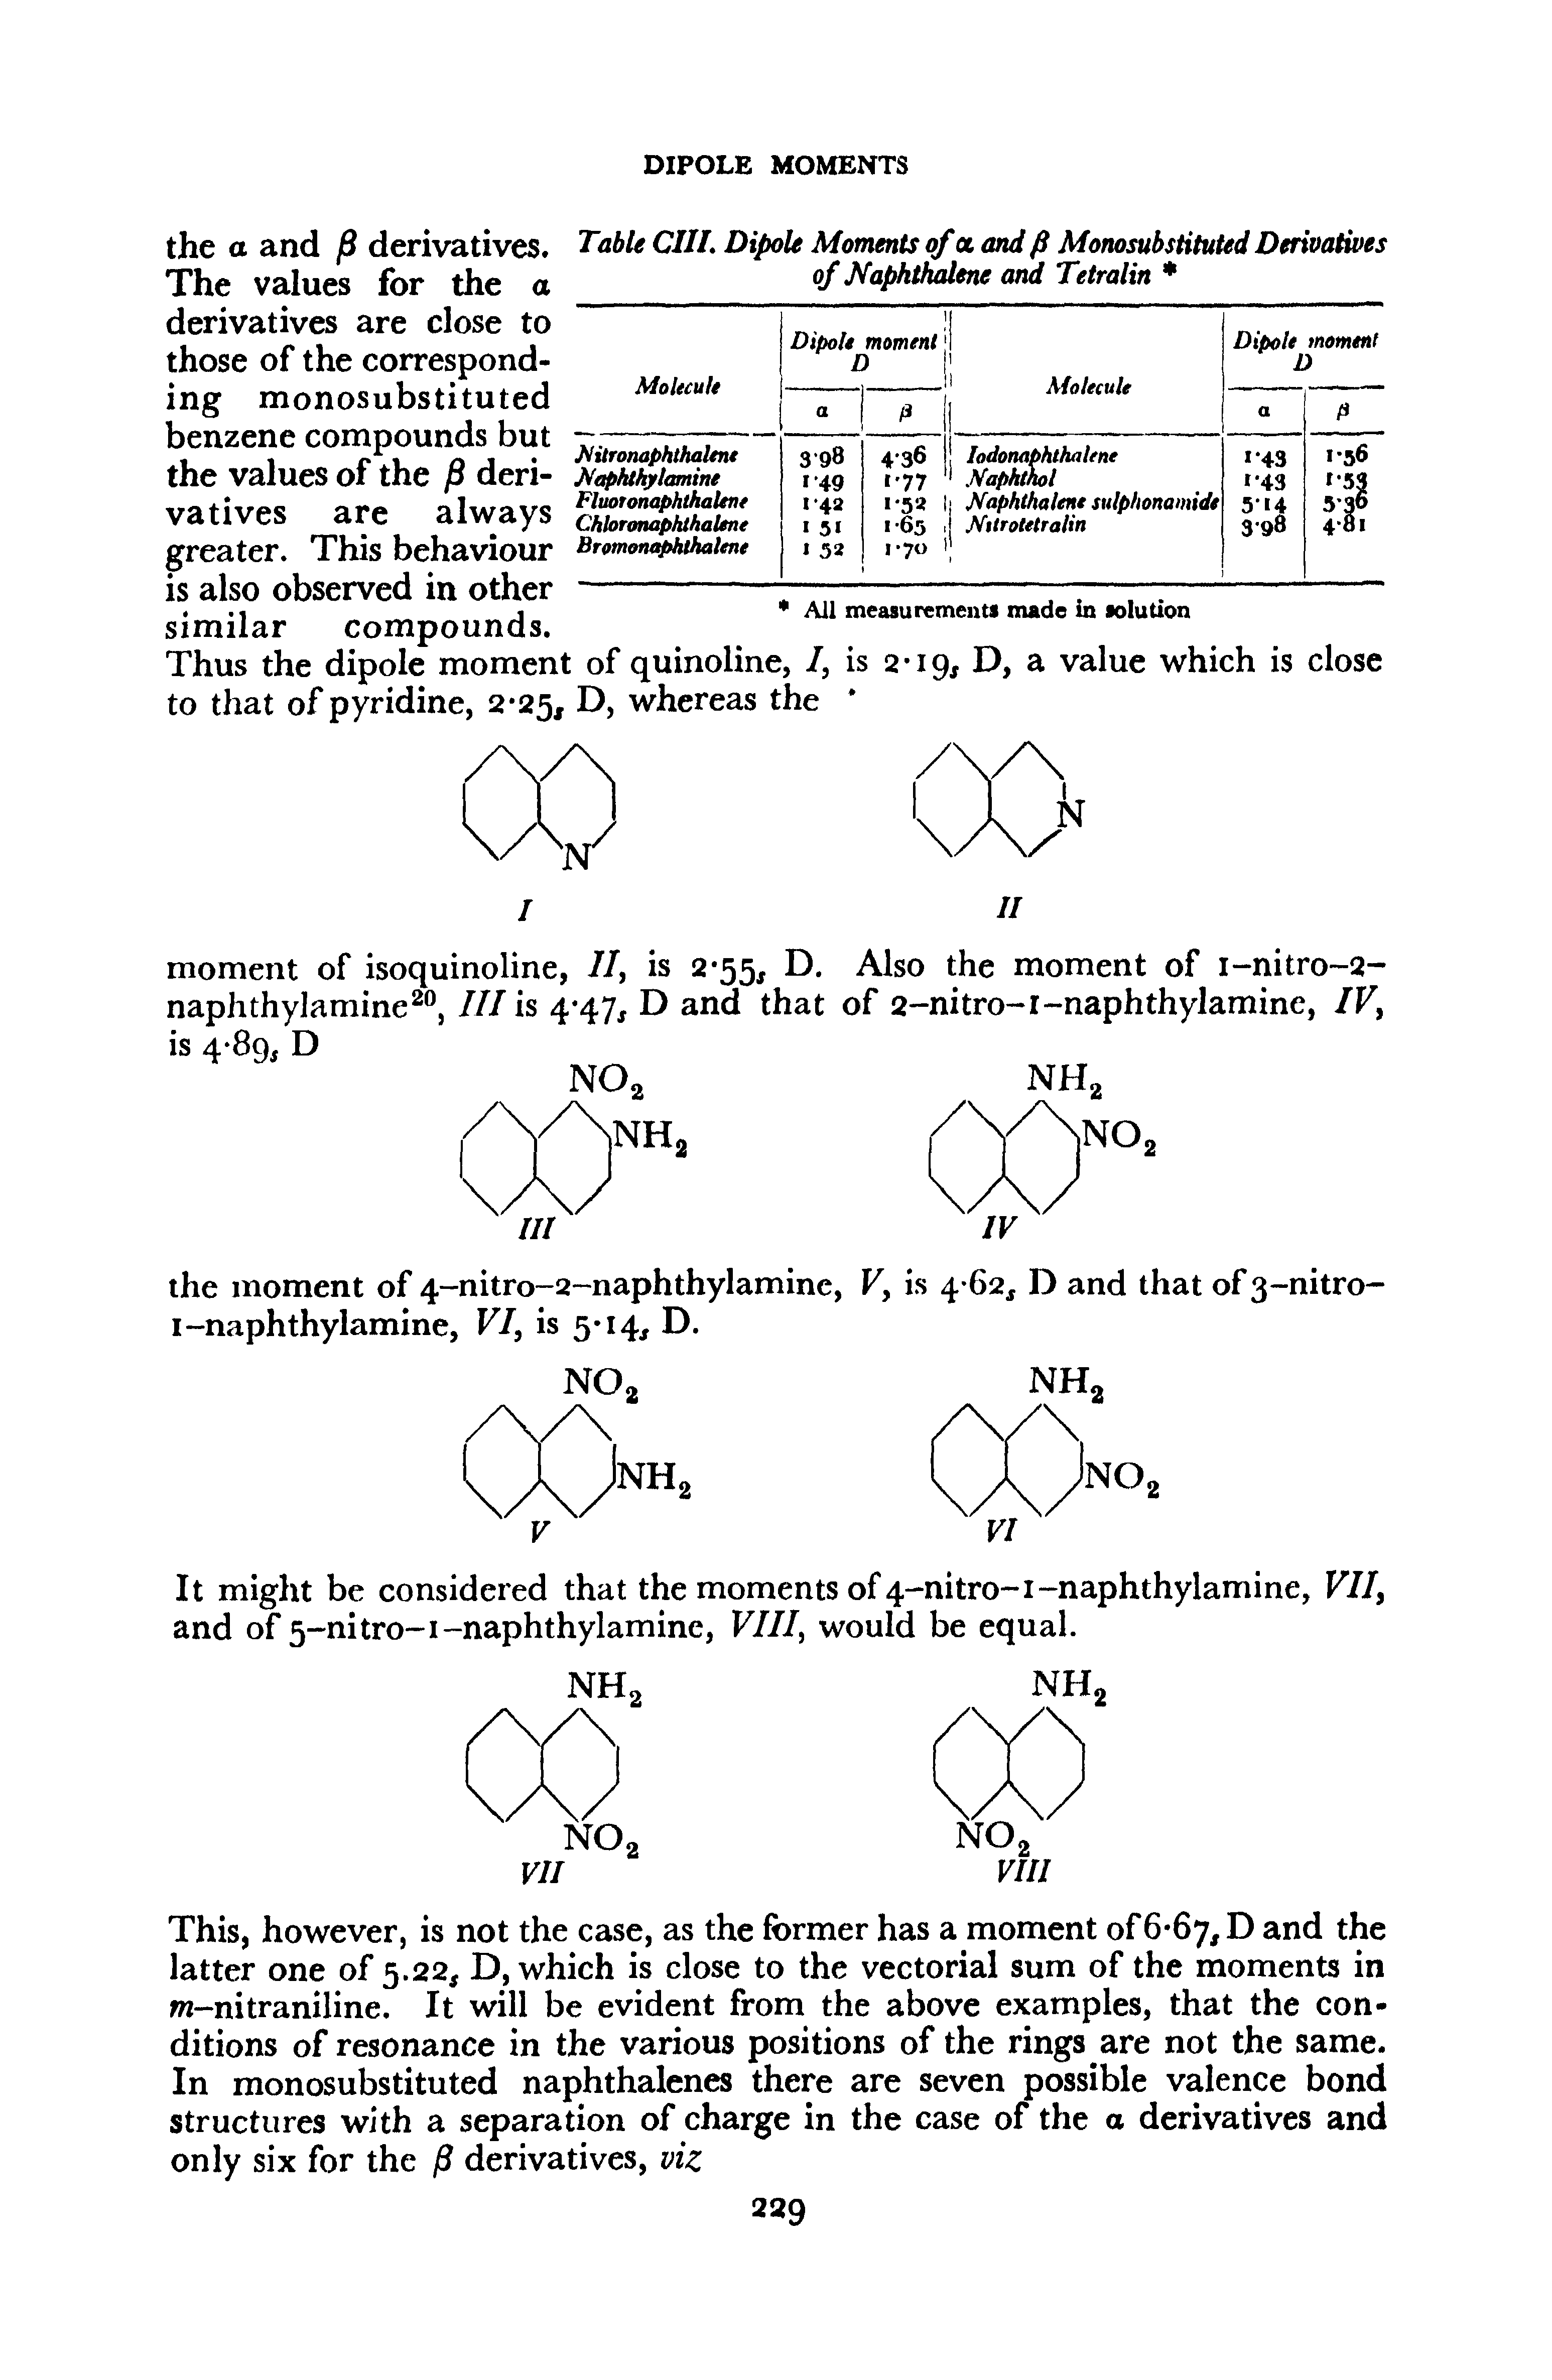 Table CIIL Dipole Moments of ot and fi Monosubstituted Derivatives of Naphthalene and Tetralin ...